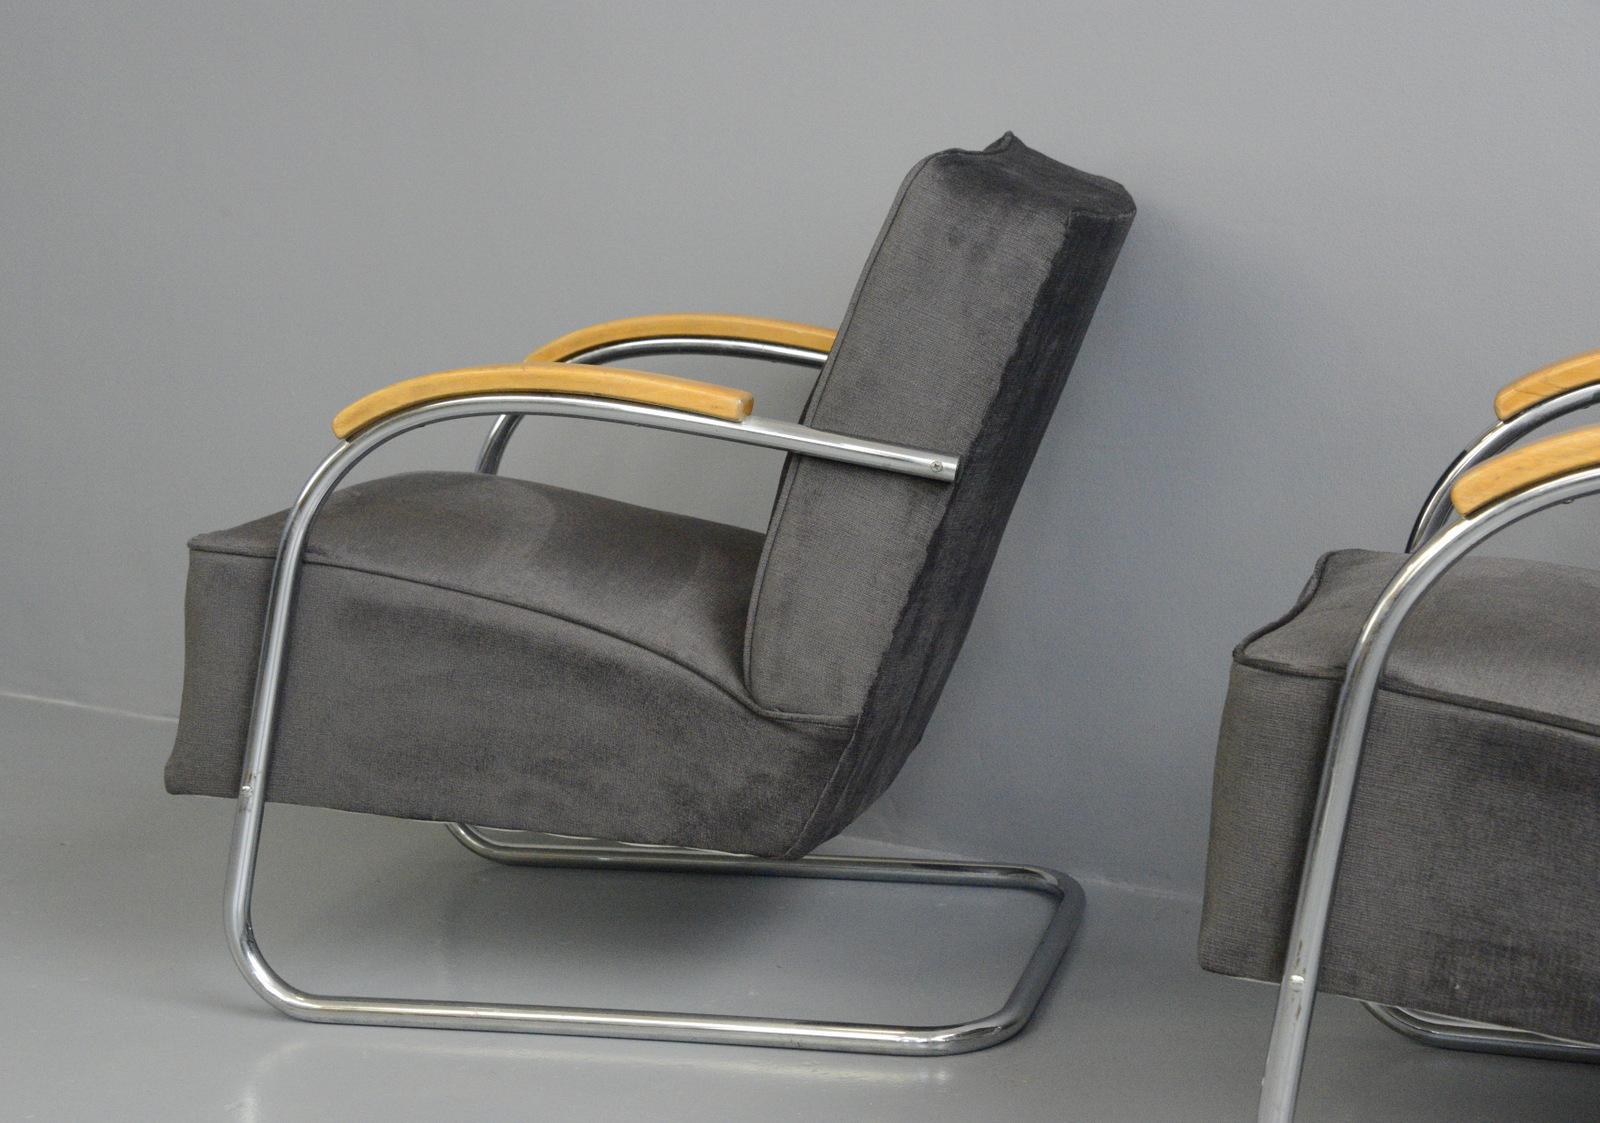 Bauhaus armchairs by Mücke Melder, circa 1930s.

- Price is for the pair
- Sprung seats and back rest
- Chrome-plated tubular steel cantilever frames
- New dark charcoal velvet upholstery
- Model FN21
- Produced by Mücke Melder
- Czech,